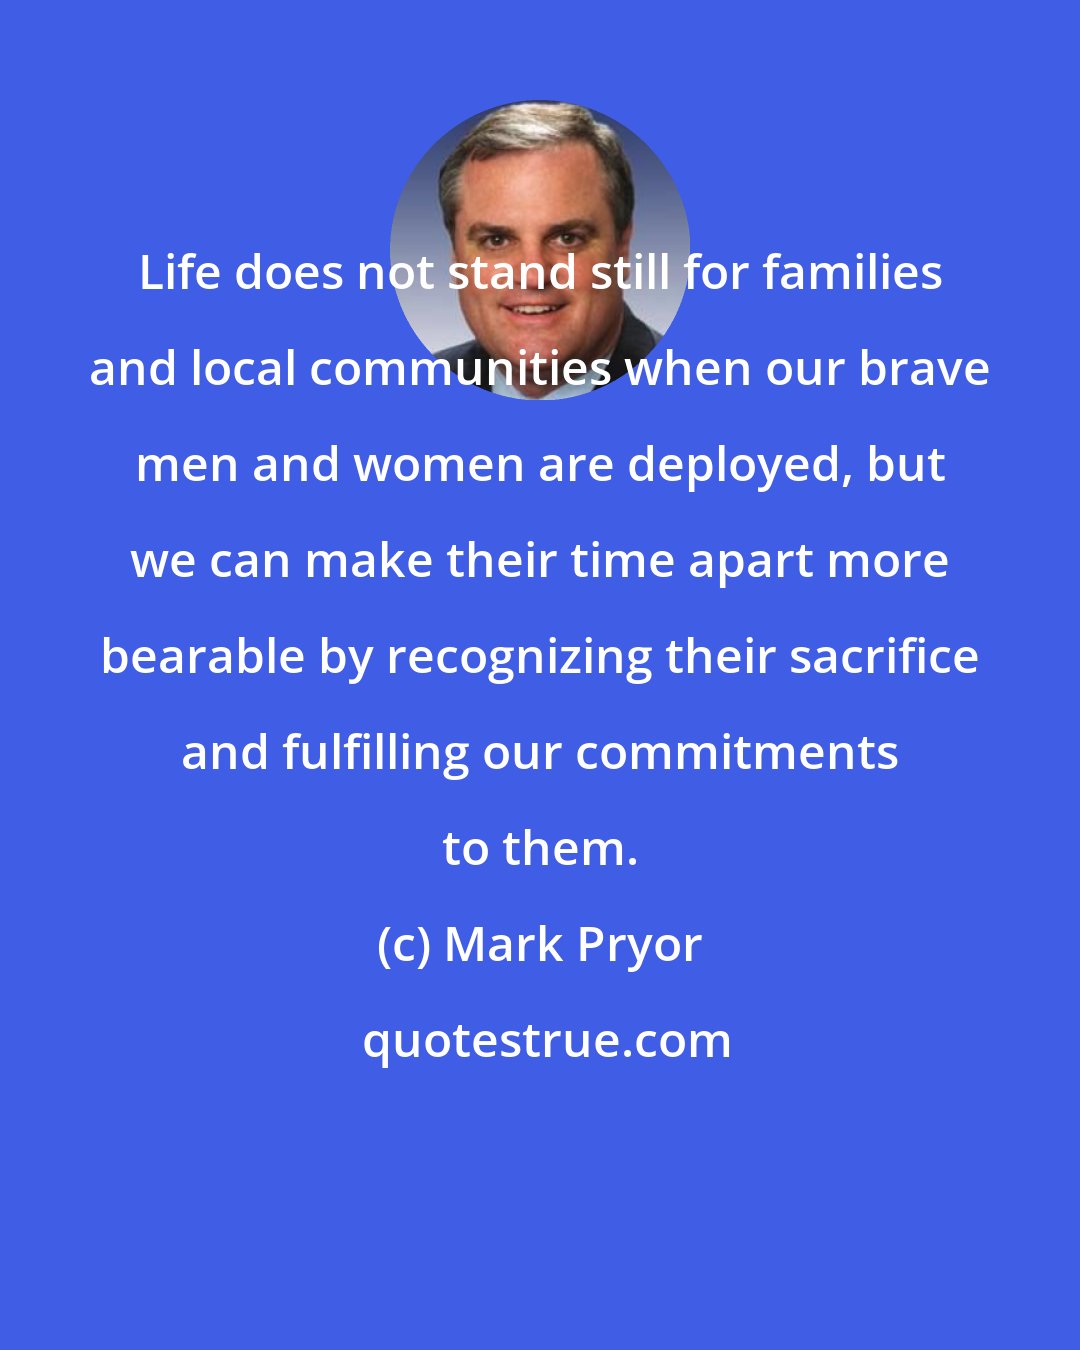 Mark Pryor: Life does not stand still for families and local communities when our brave men and women are deployed, but we can make their time apart more bearable by recognizing their sacrifice and fulfilling our commitments to them.